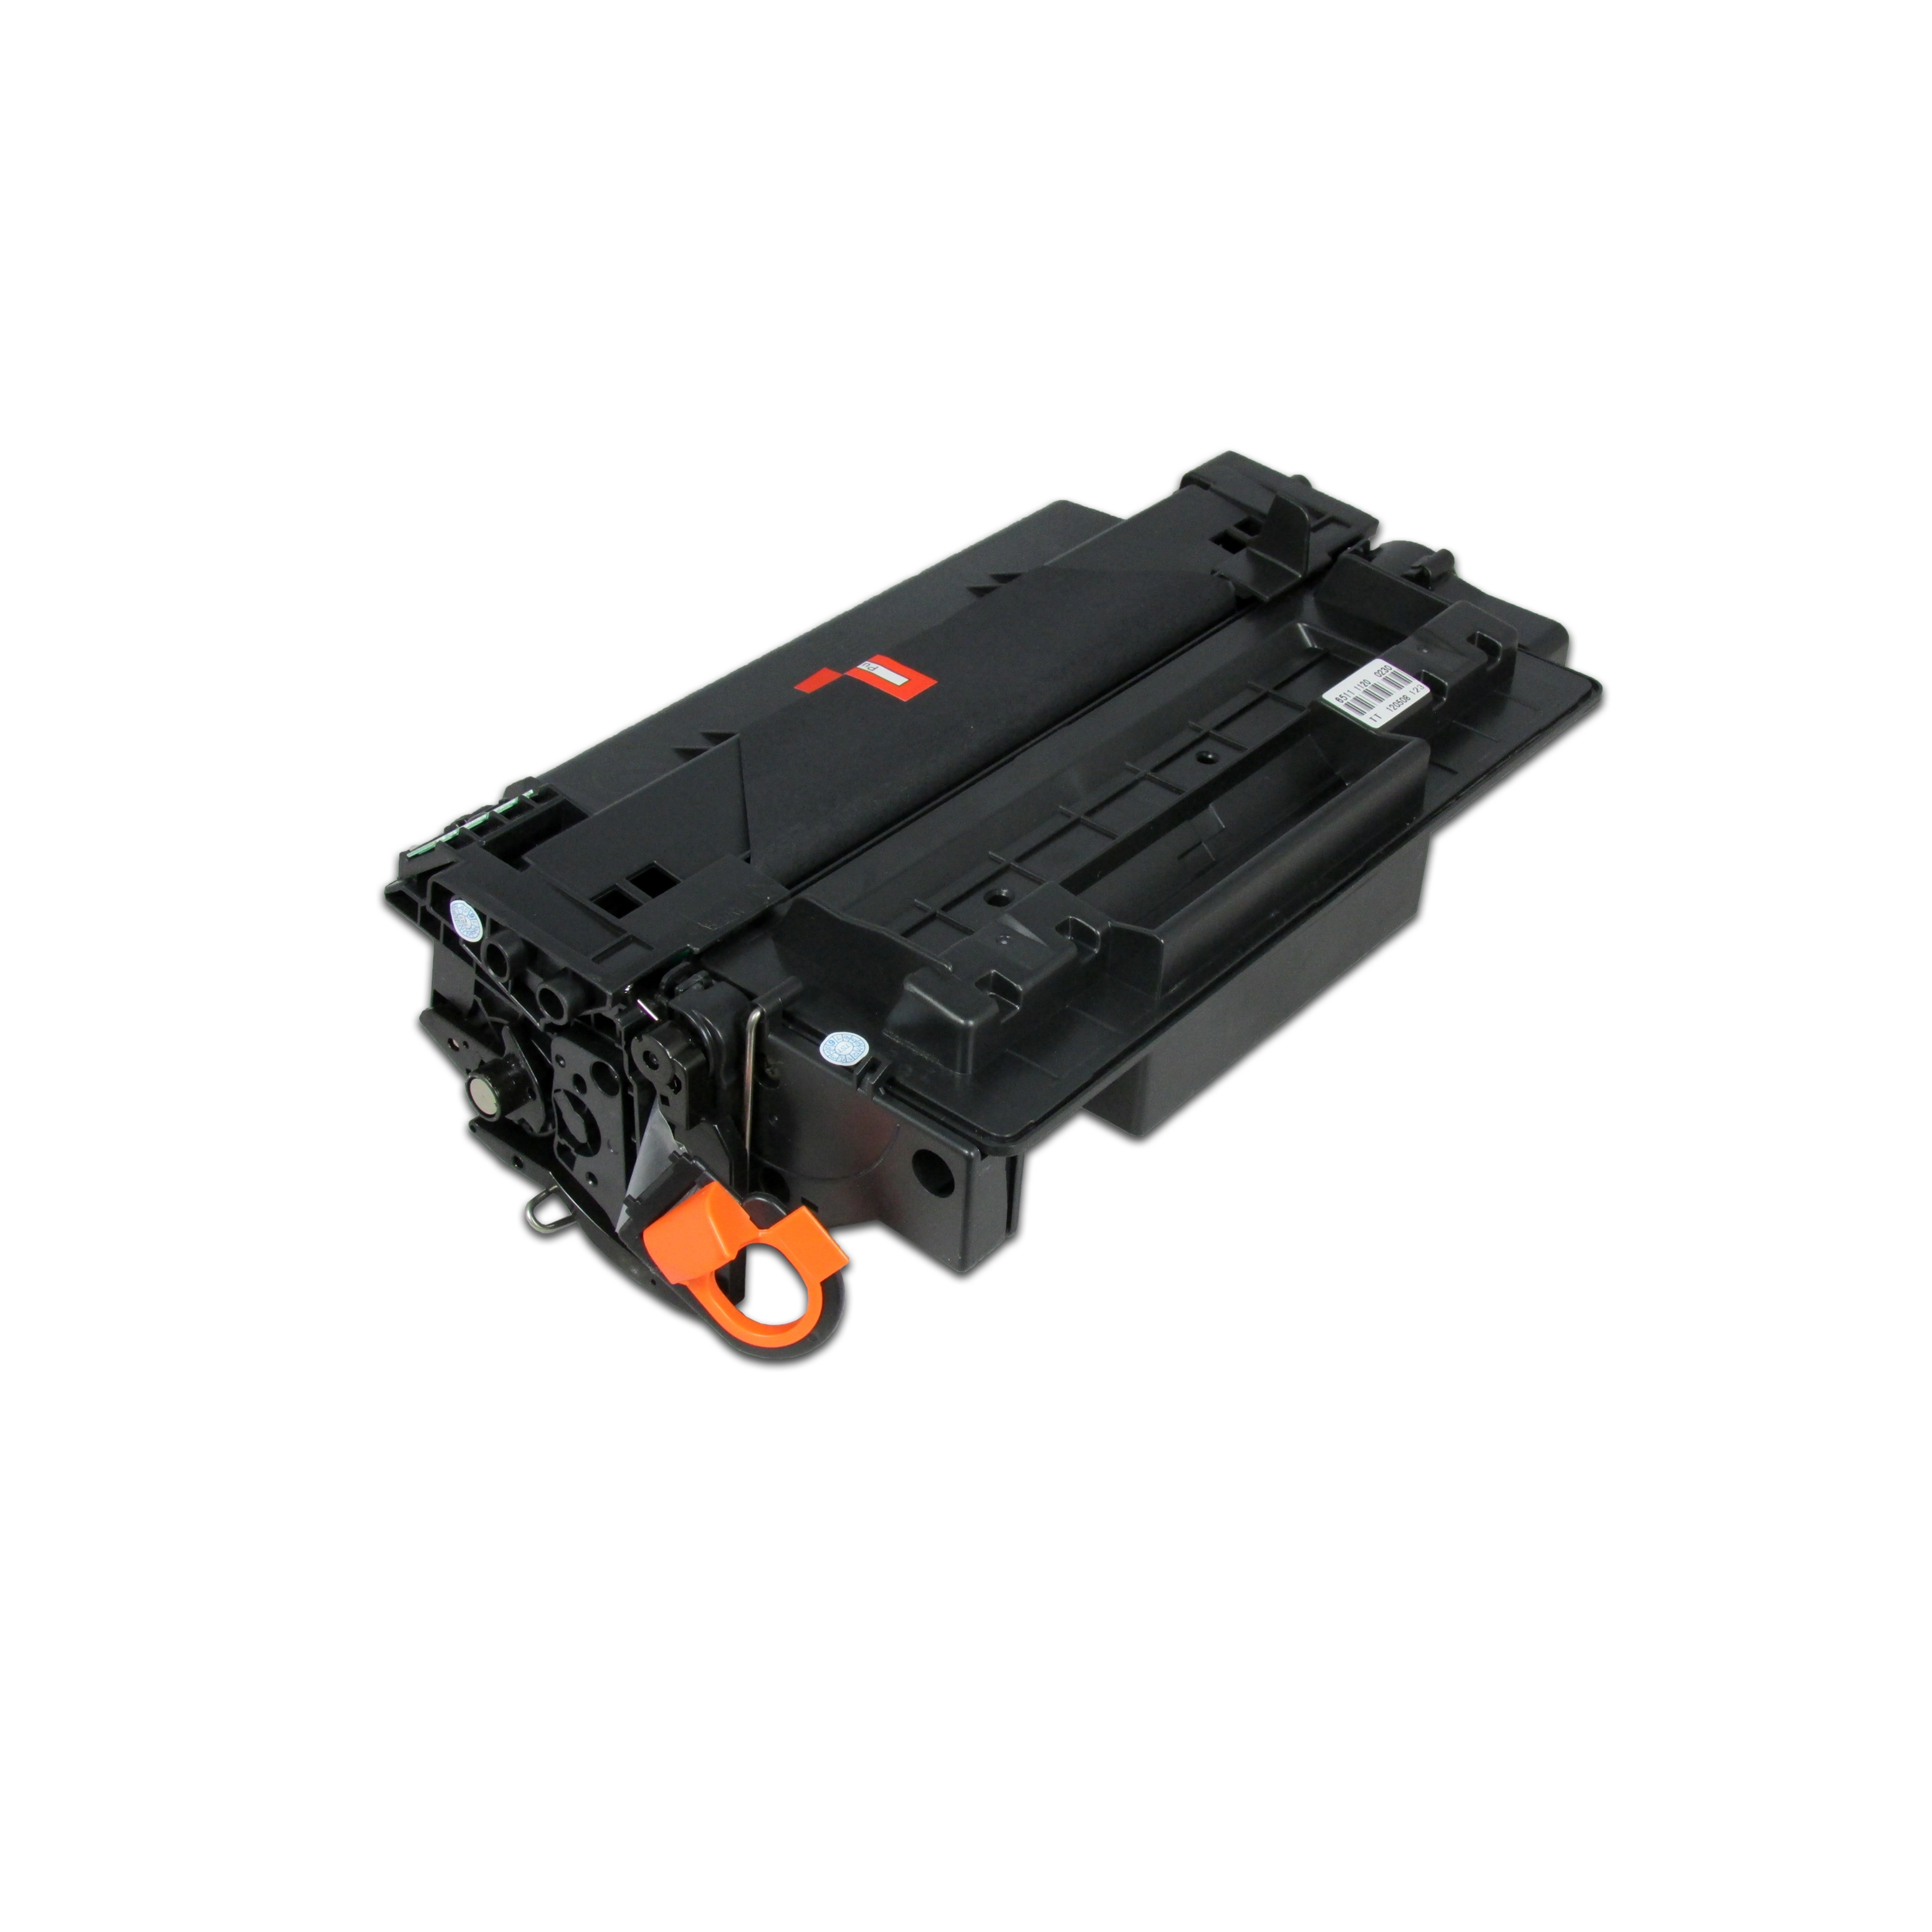 Q6511A toner cartridge Use For 2400/2410/2420/2430